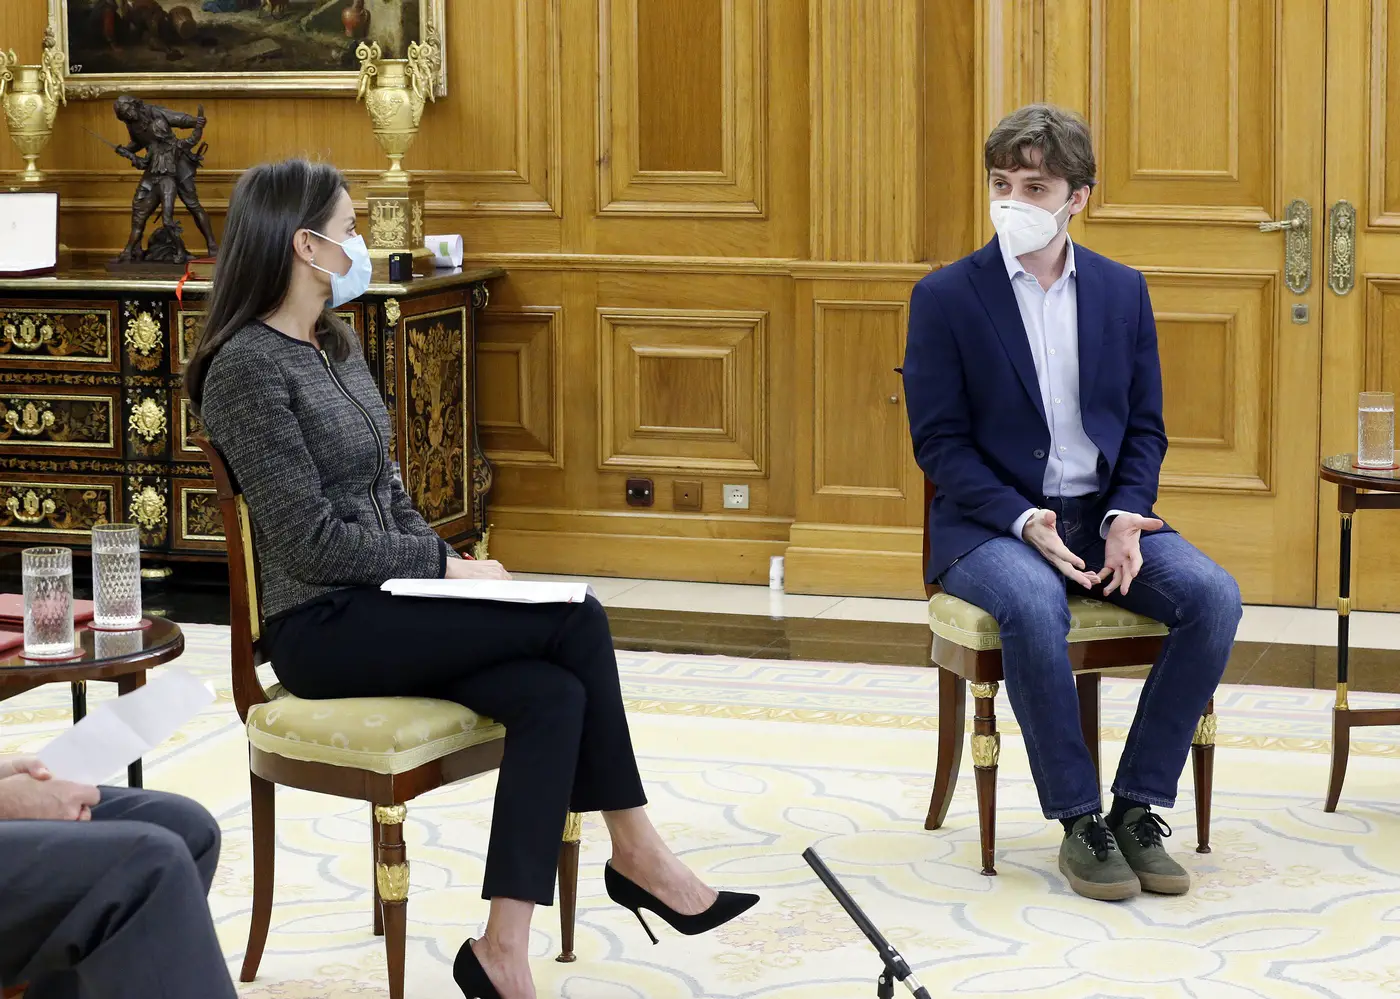 Queen Letizia joined the youngsters for a group discussion